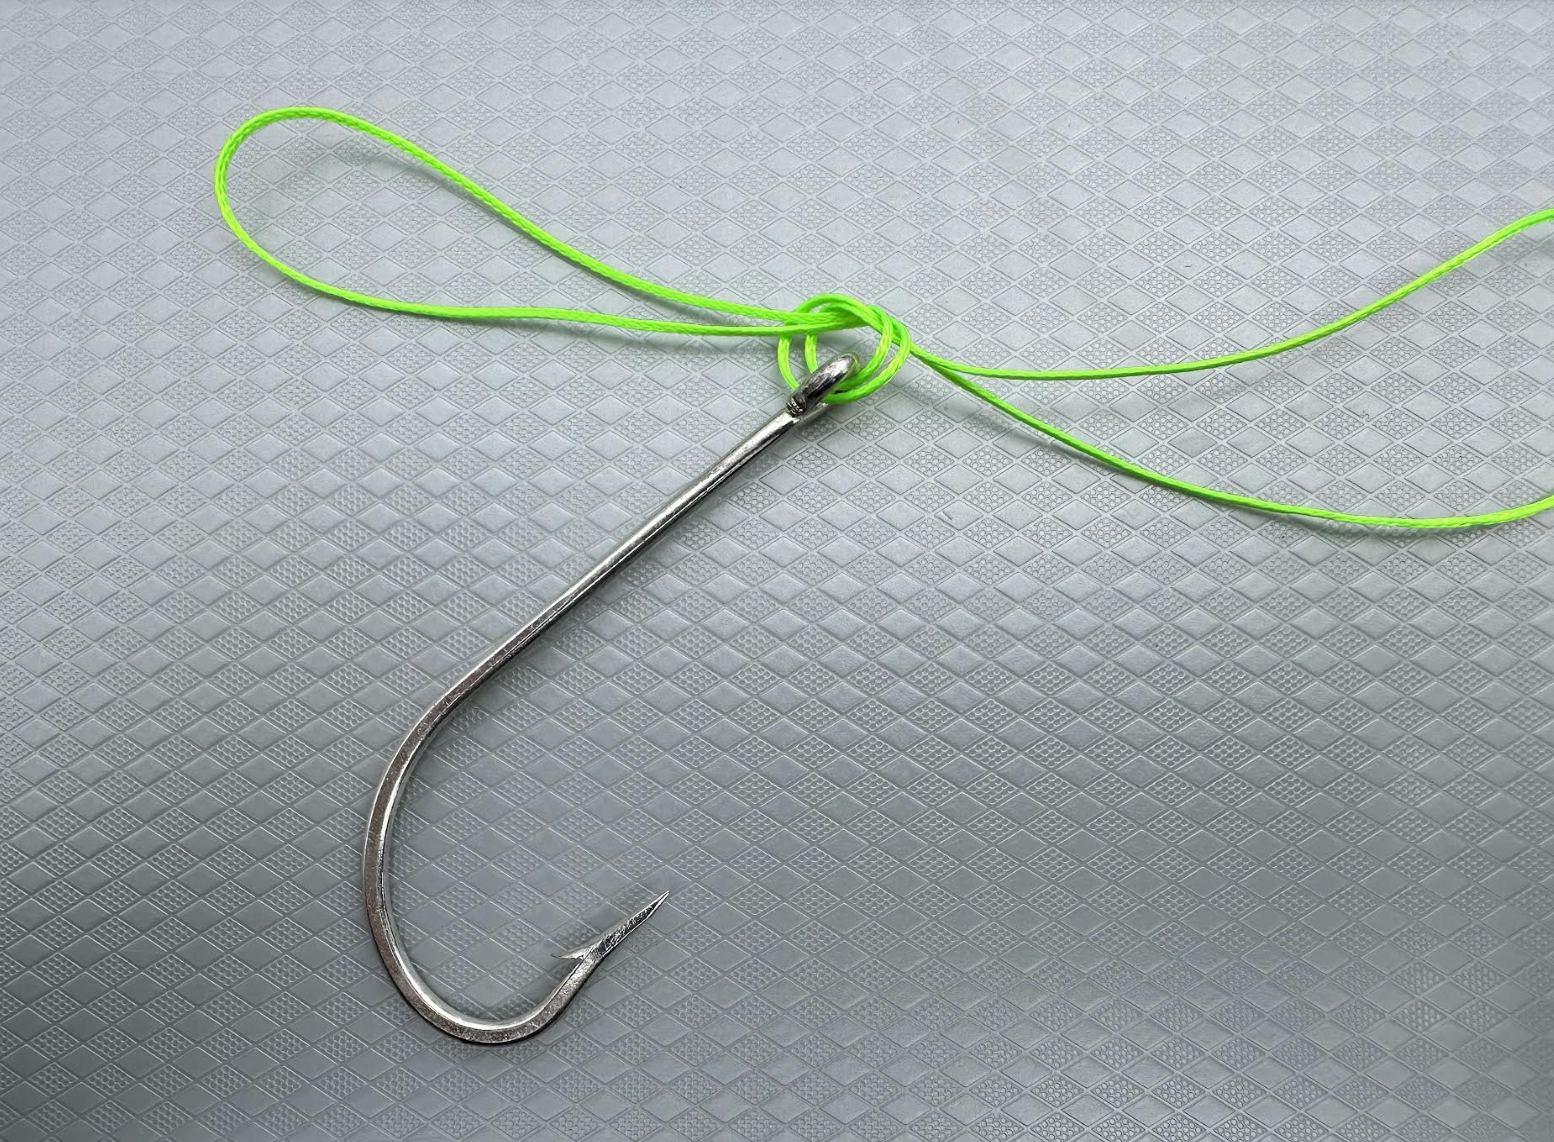 FG Knot: How to Tie It and Why You Should Use It